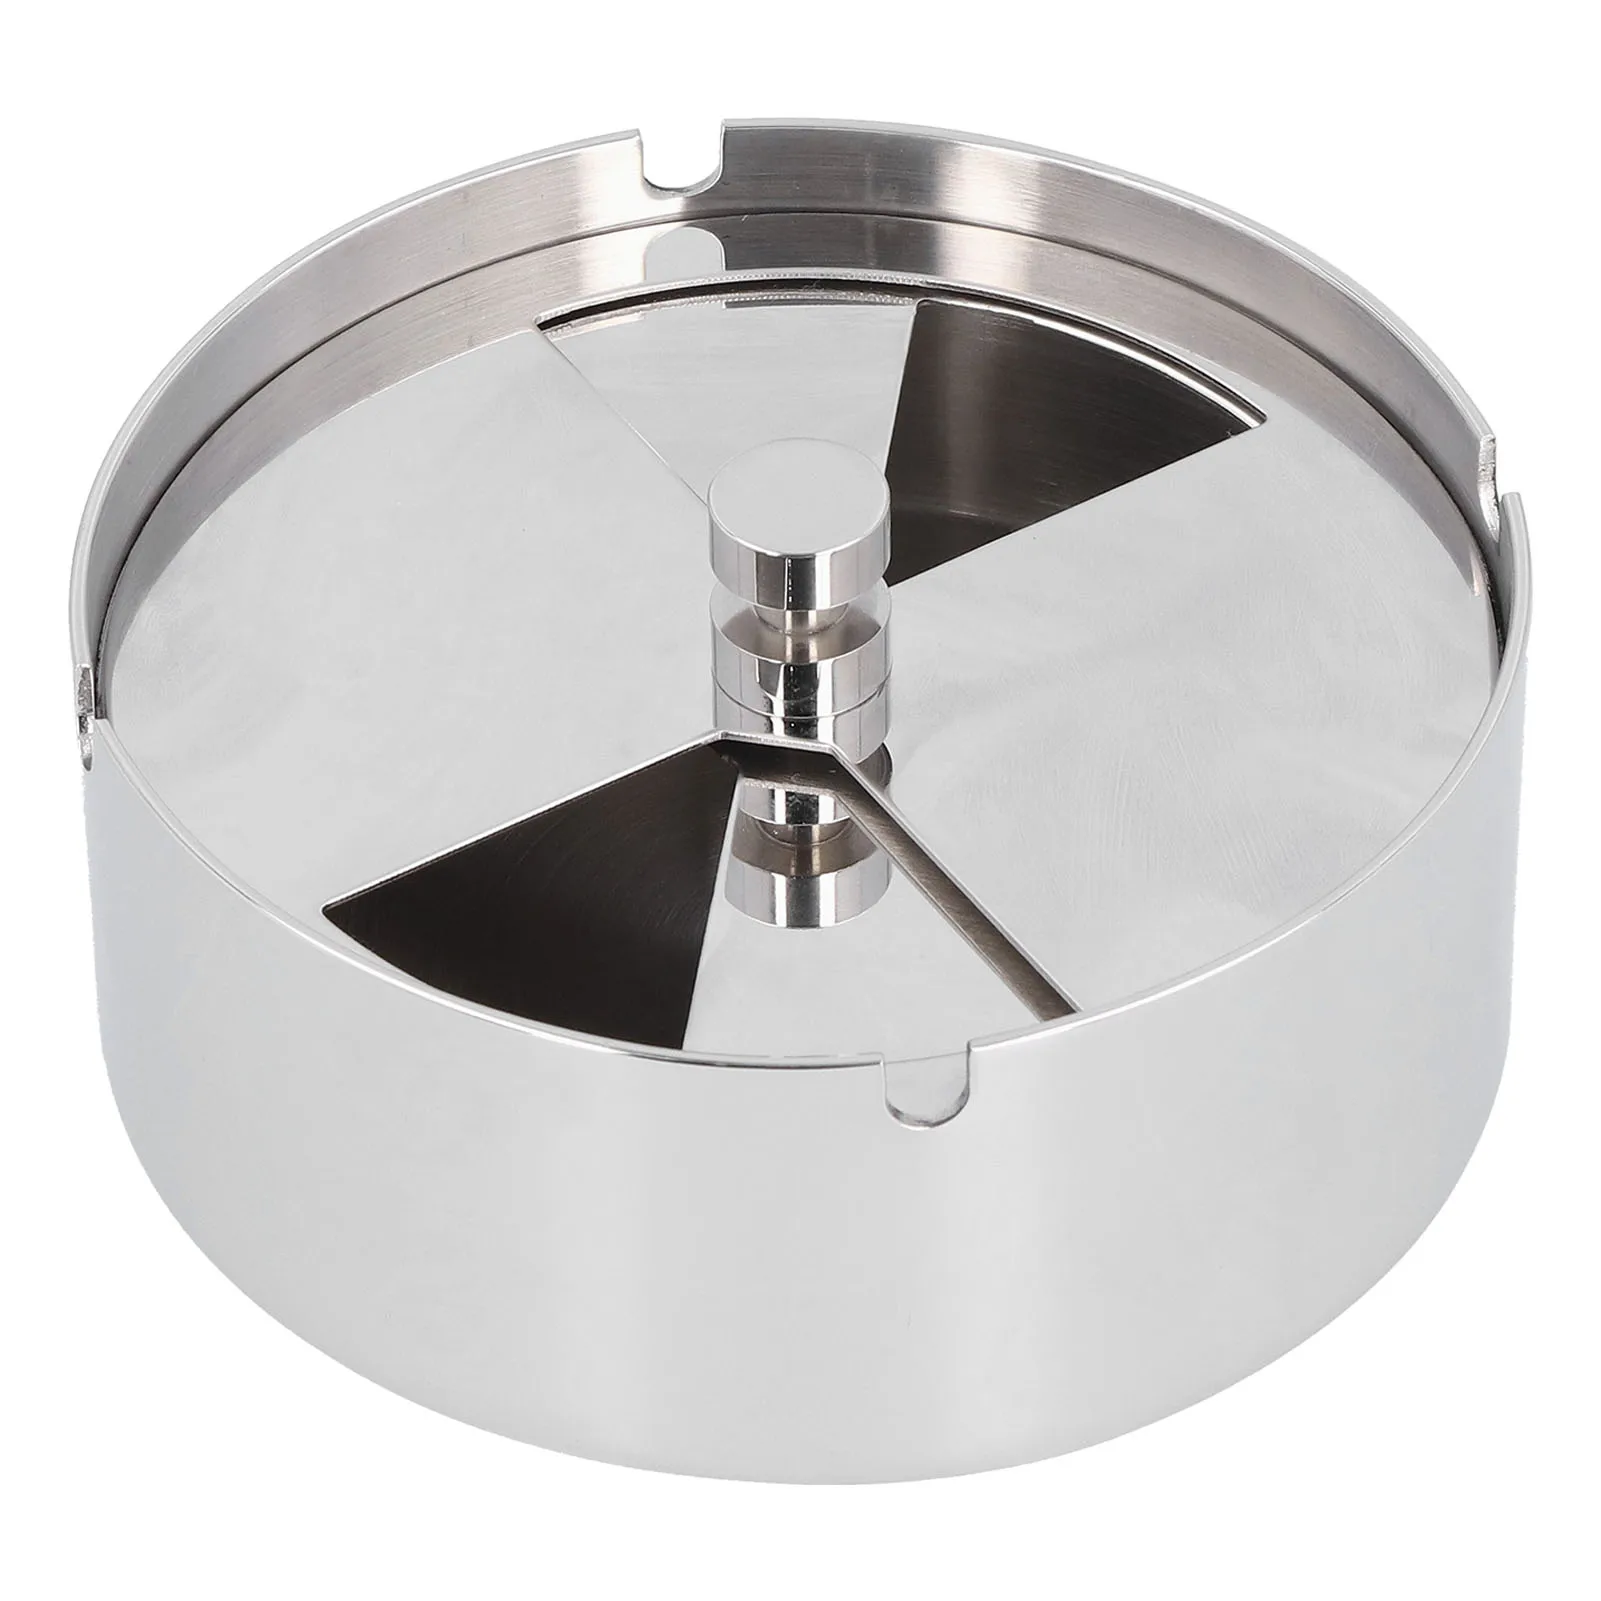 

Ashtray Outdoor Thickened Stainless Steel Windproof Rotating Cover Design Finely Polished Ashtray for Home Office